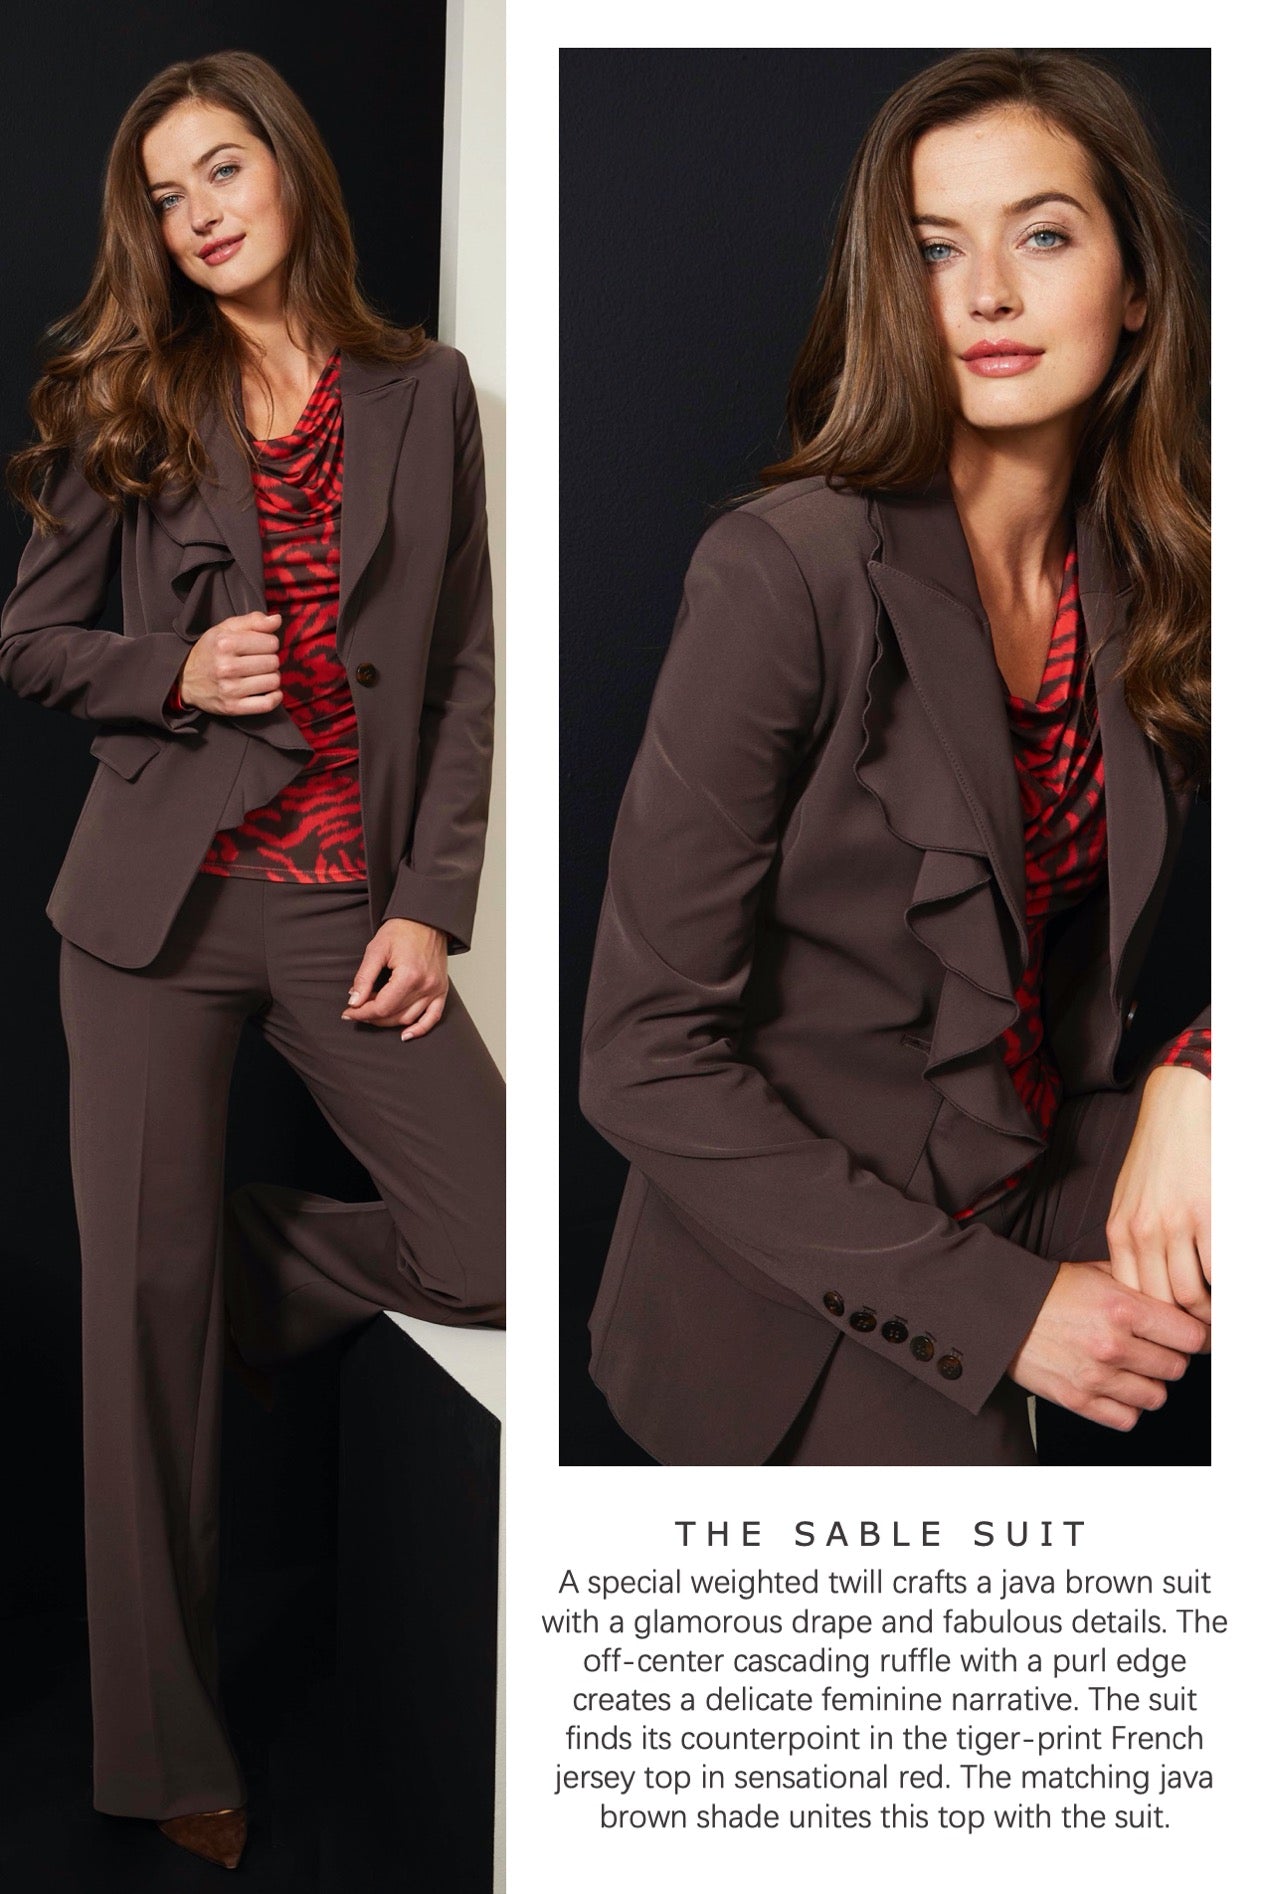 The Sable Suit